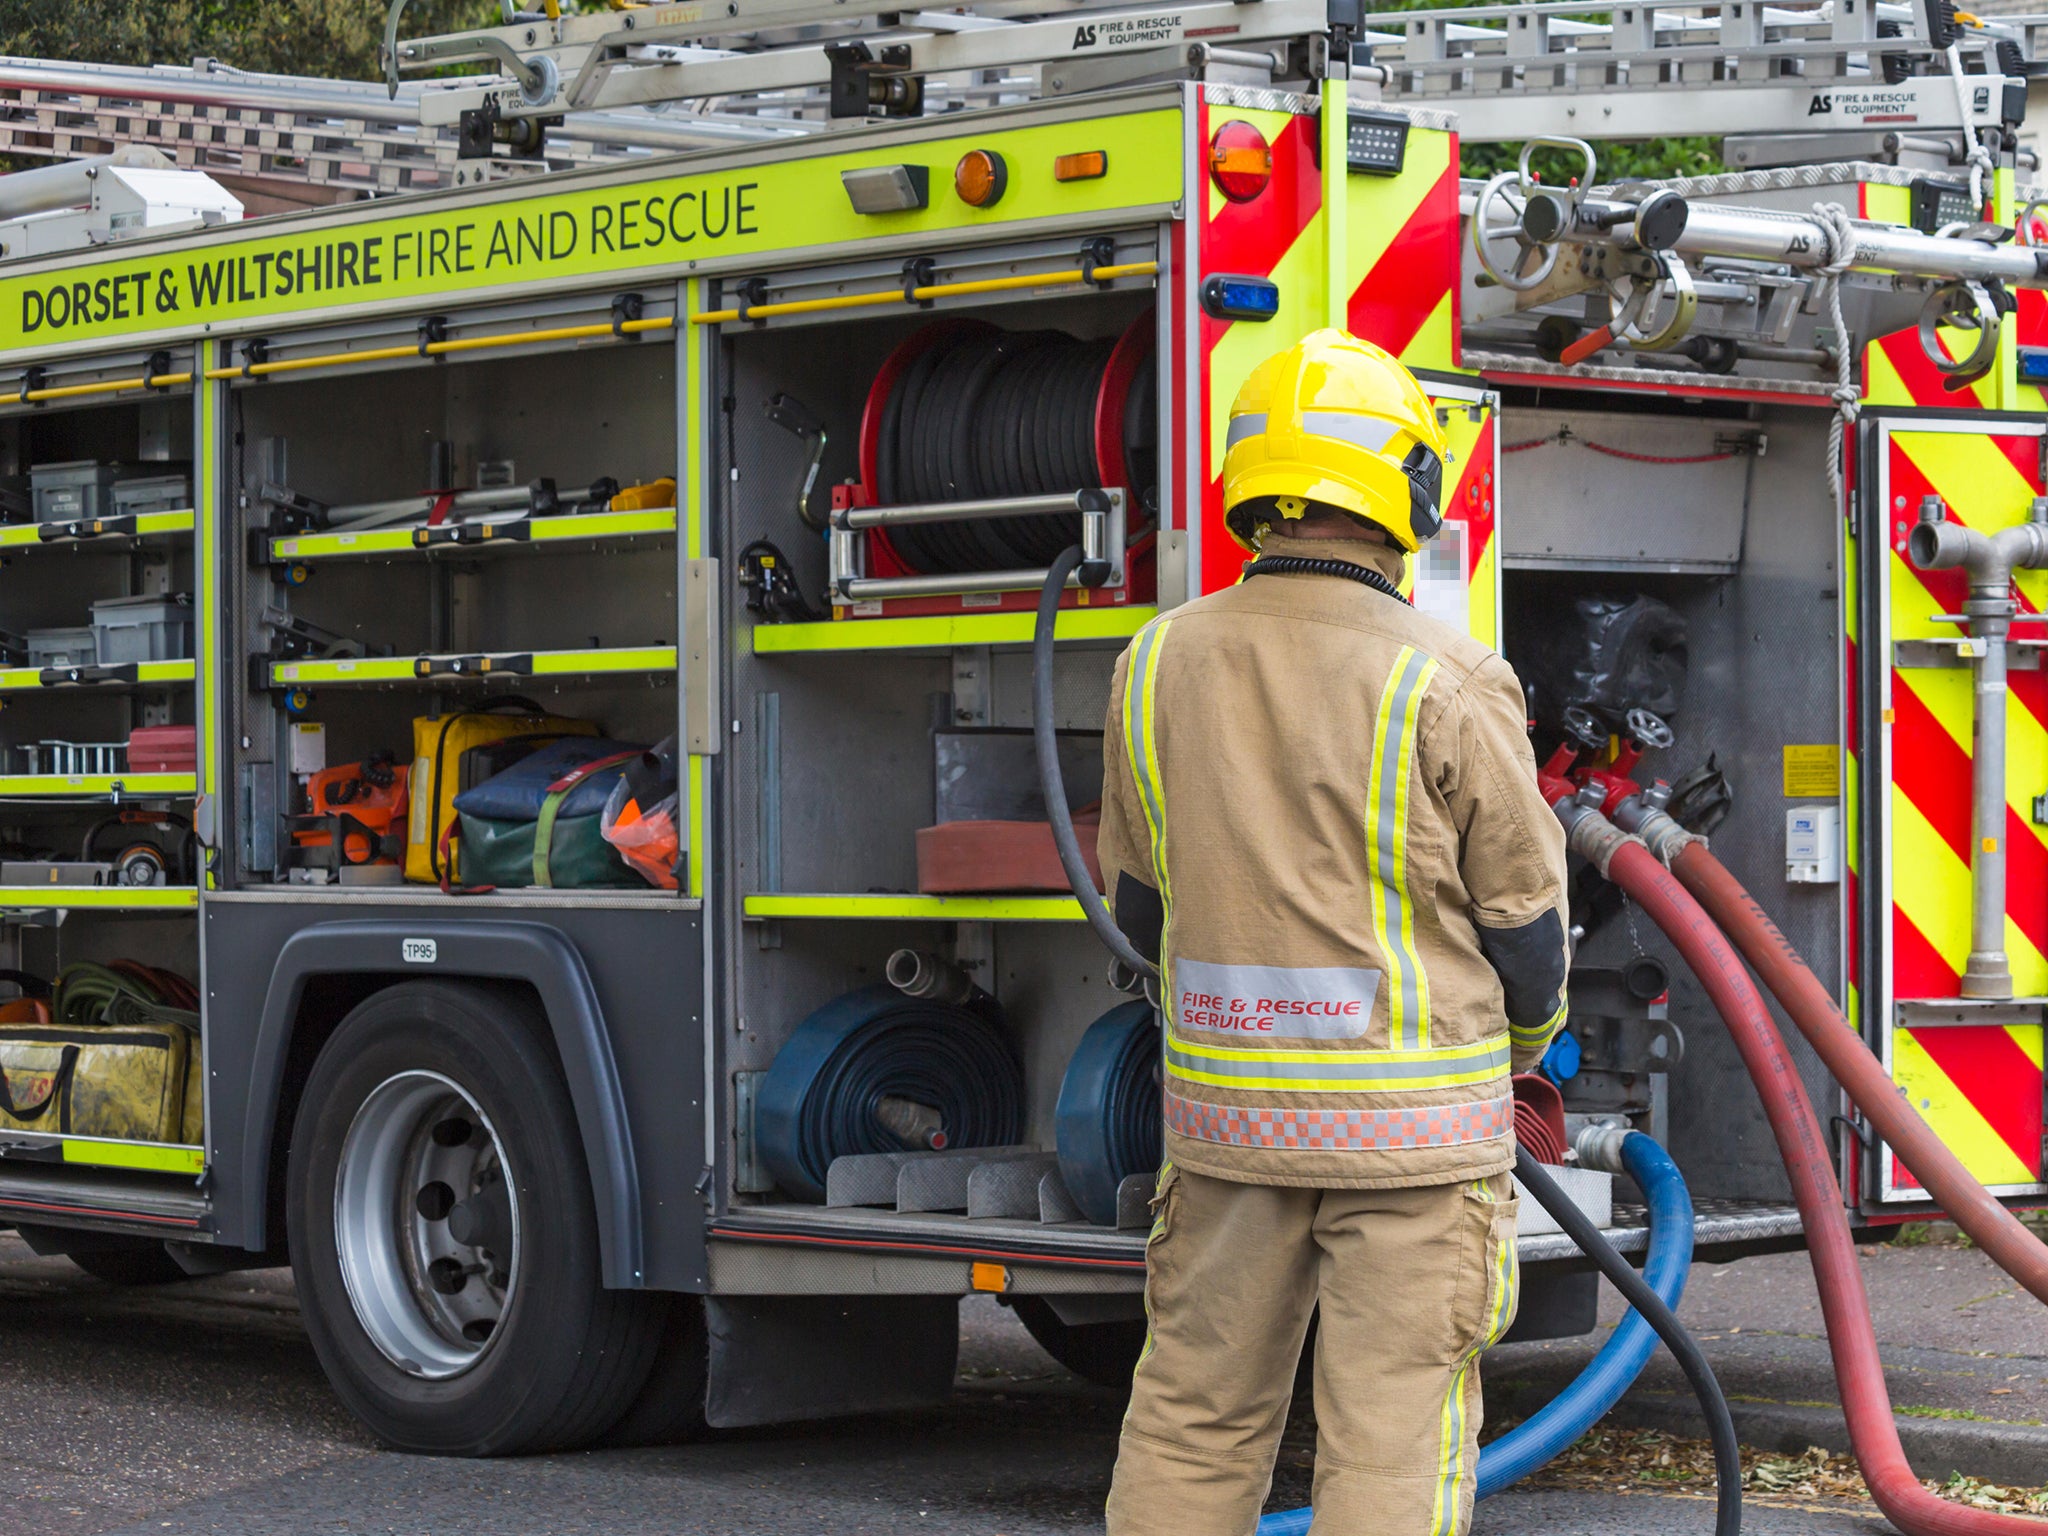 Dorset and Wiltshire Fire and Rescue Service is launching an independent review to investigate claims